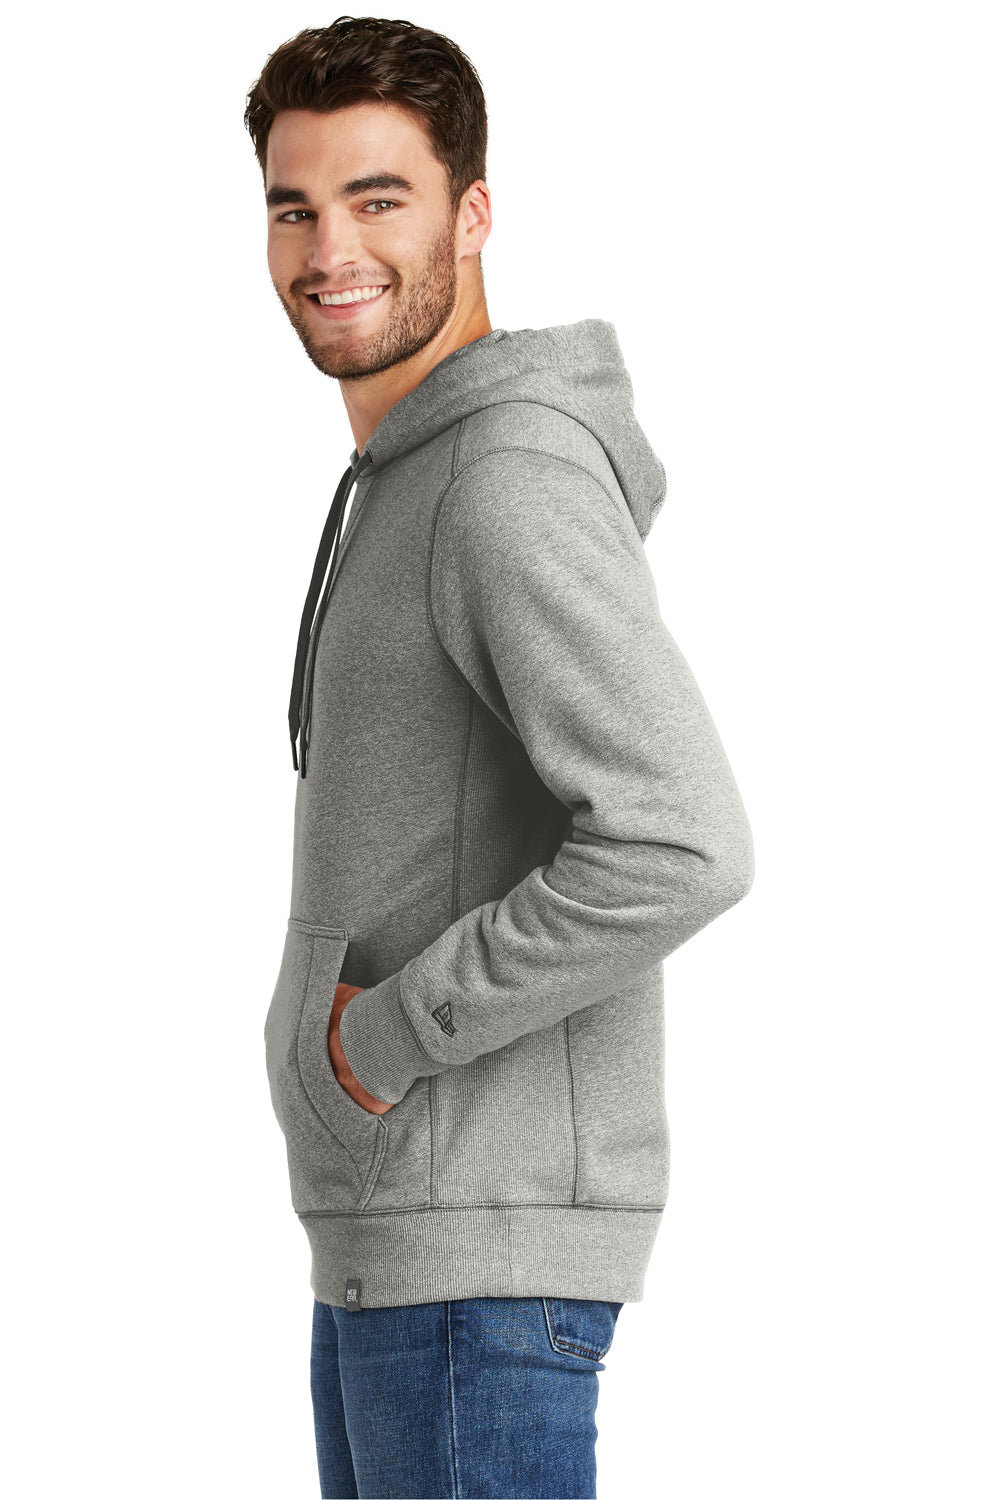 New Era Mens French Terry Hoodie